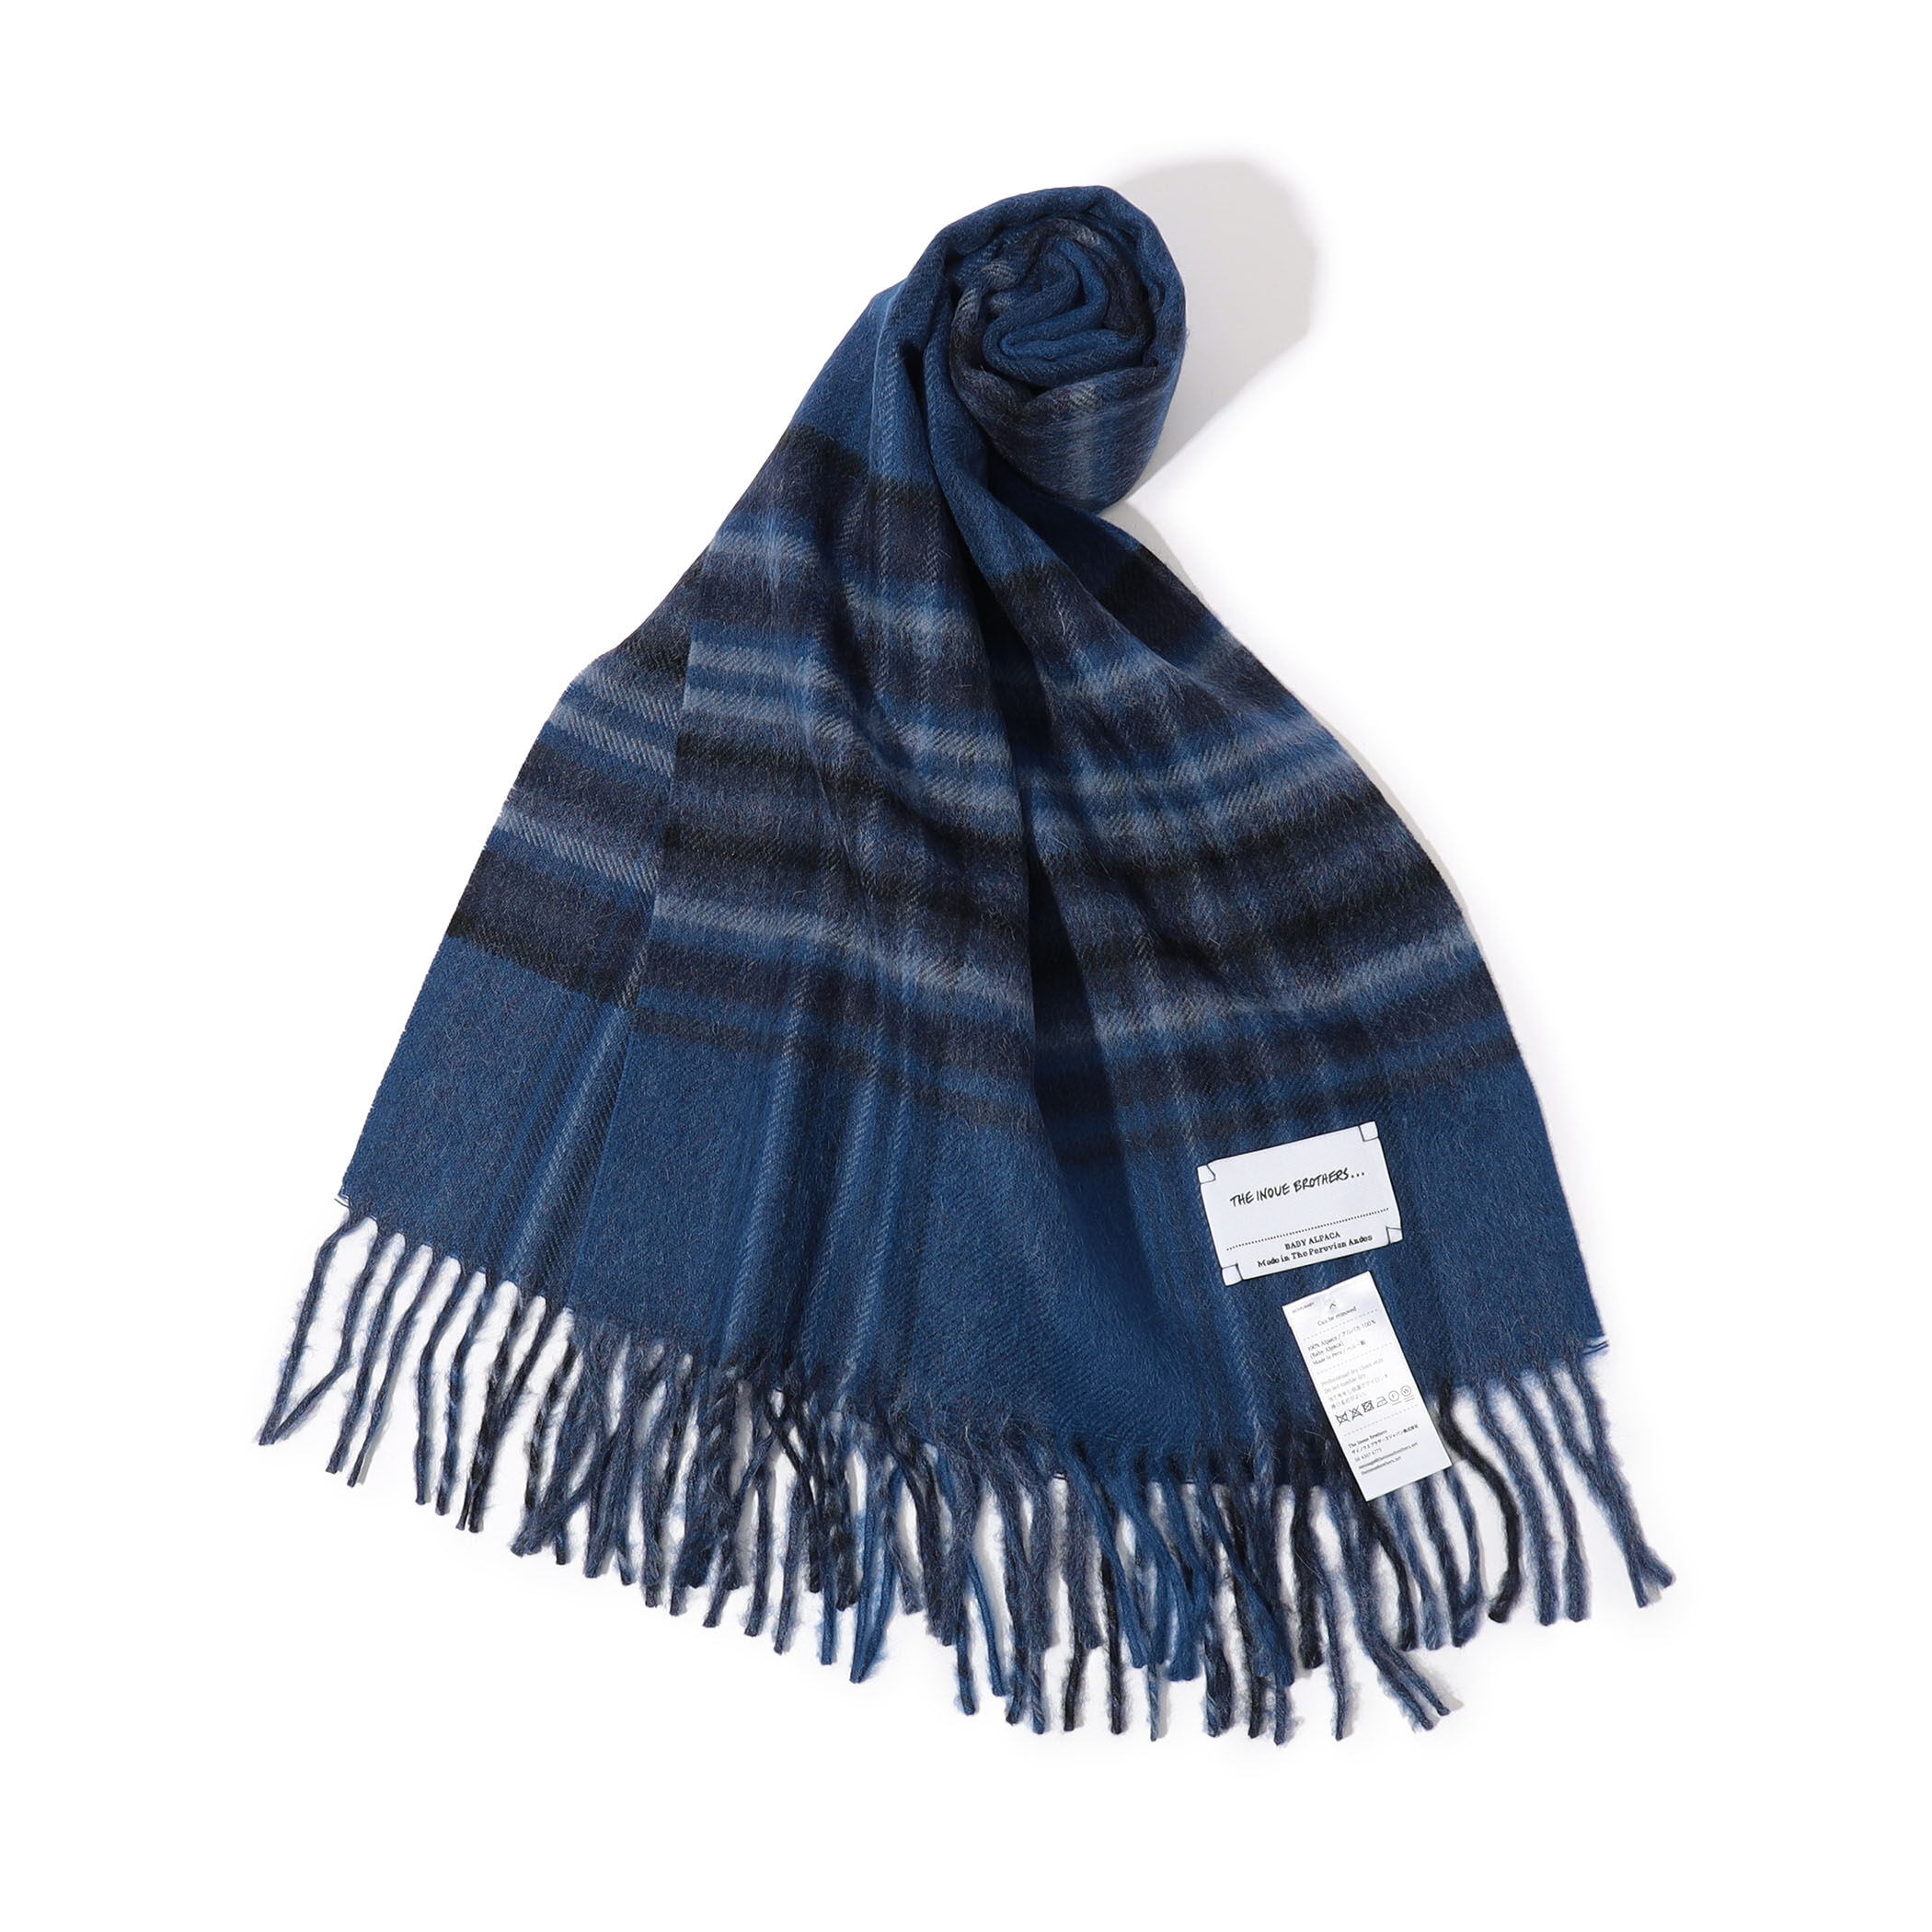 THE INOUE BROTHERS Brushed Scarf チェックストール 